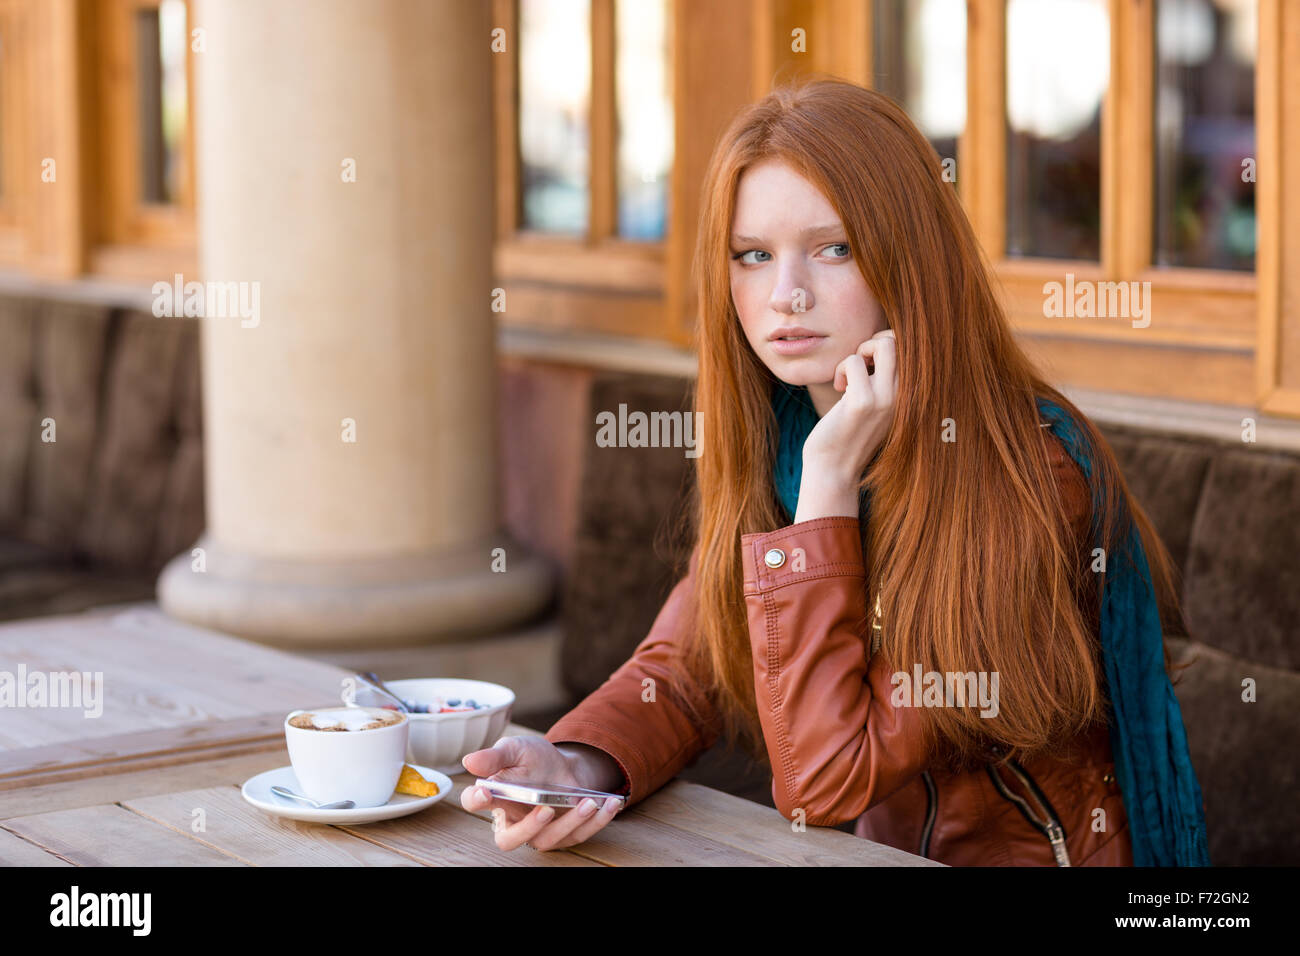 A rocker with long beards and long hair participates in the festival  redheads Stock Photo - Alamy